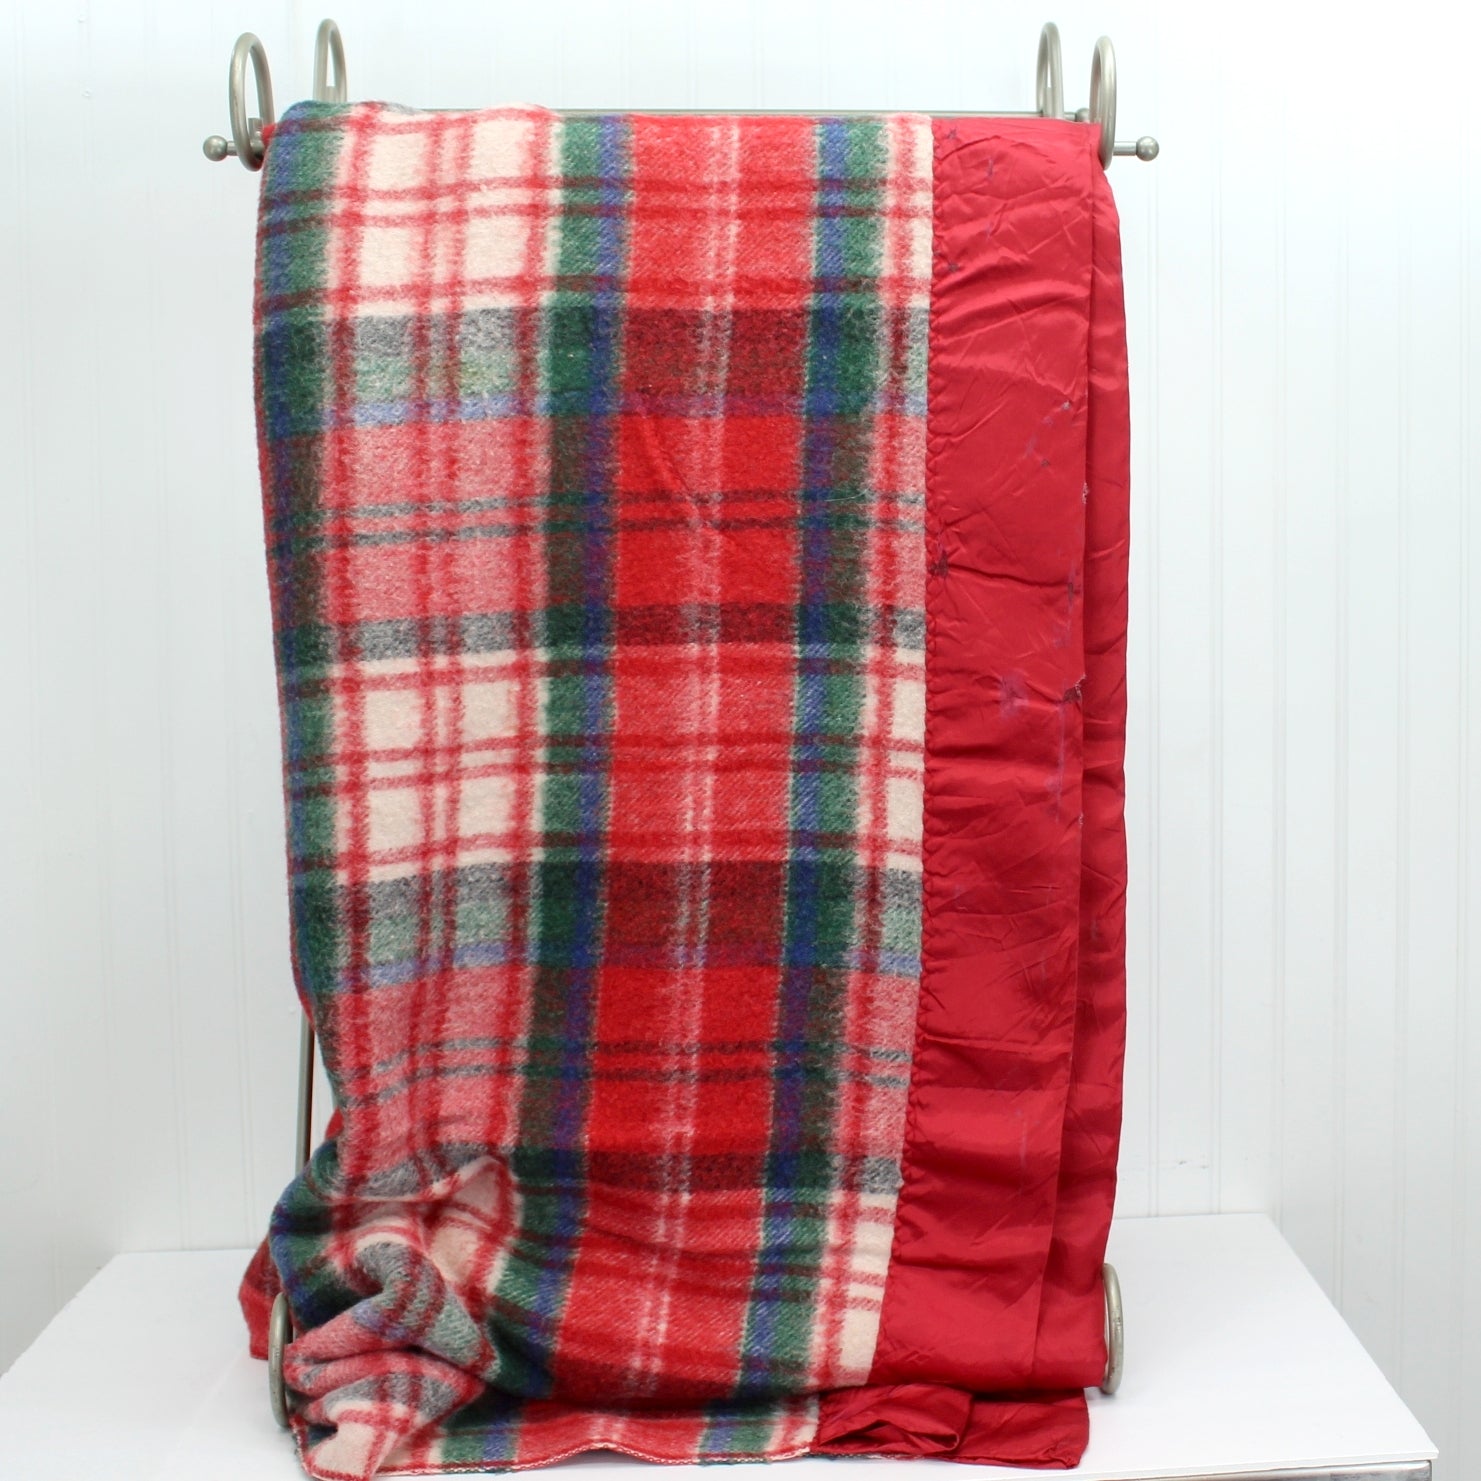 Acrylic Blanket Subtle Shades Red Blue Green Plaid  79" X 82" Special Price Use Cutter cutter diy repurpose blanket